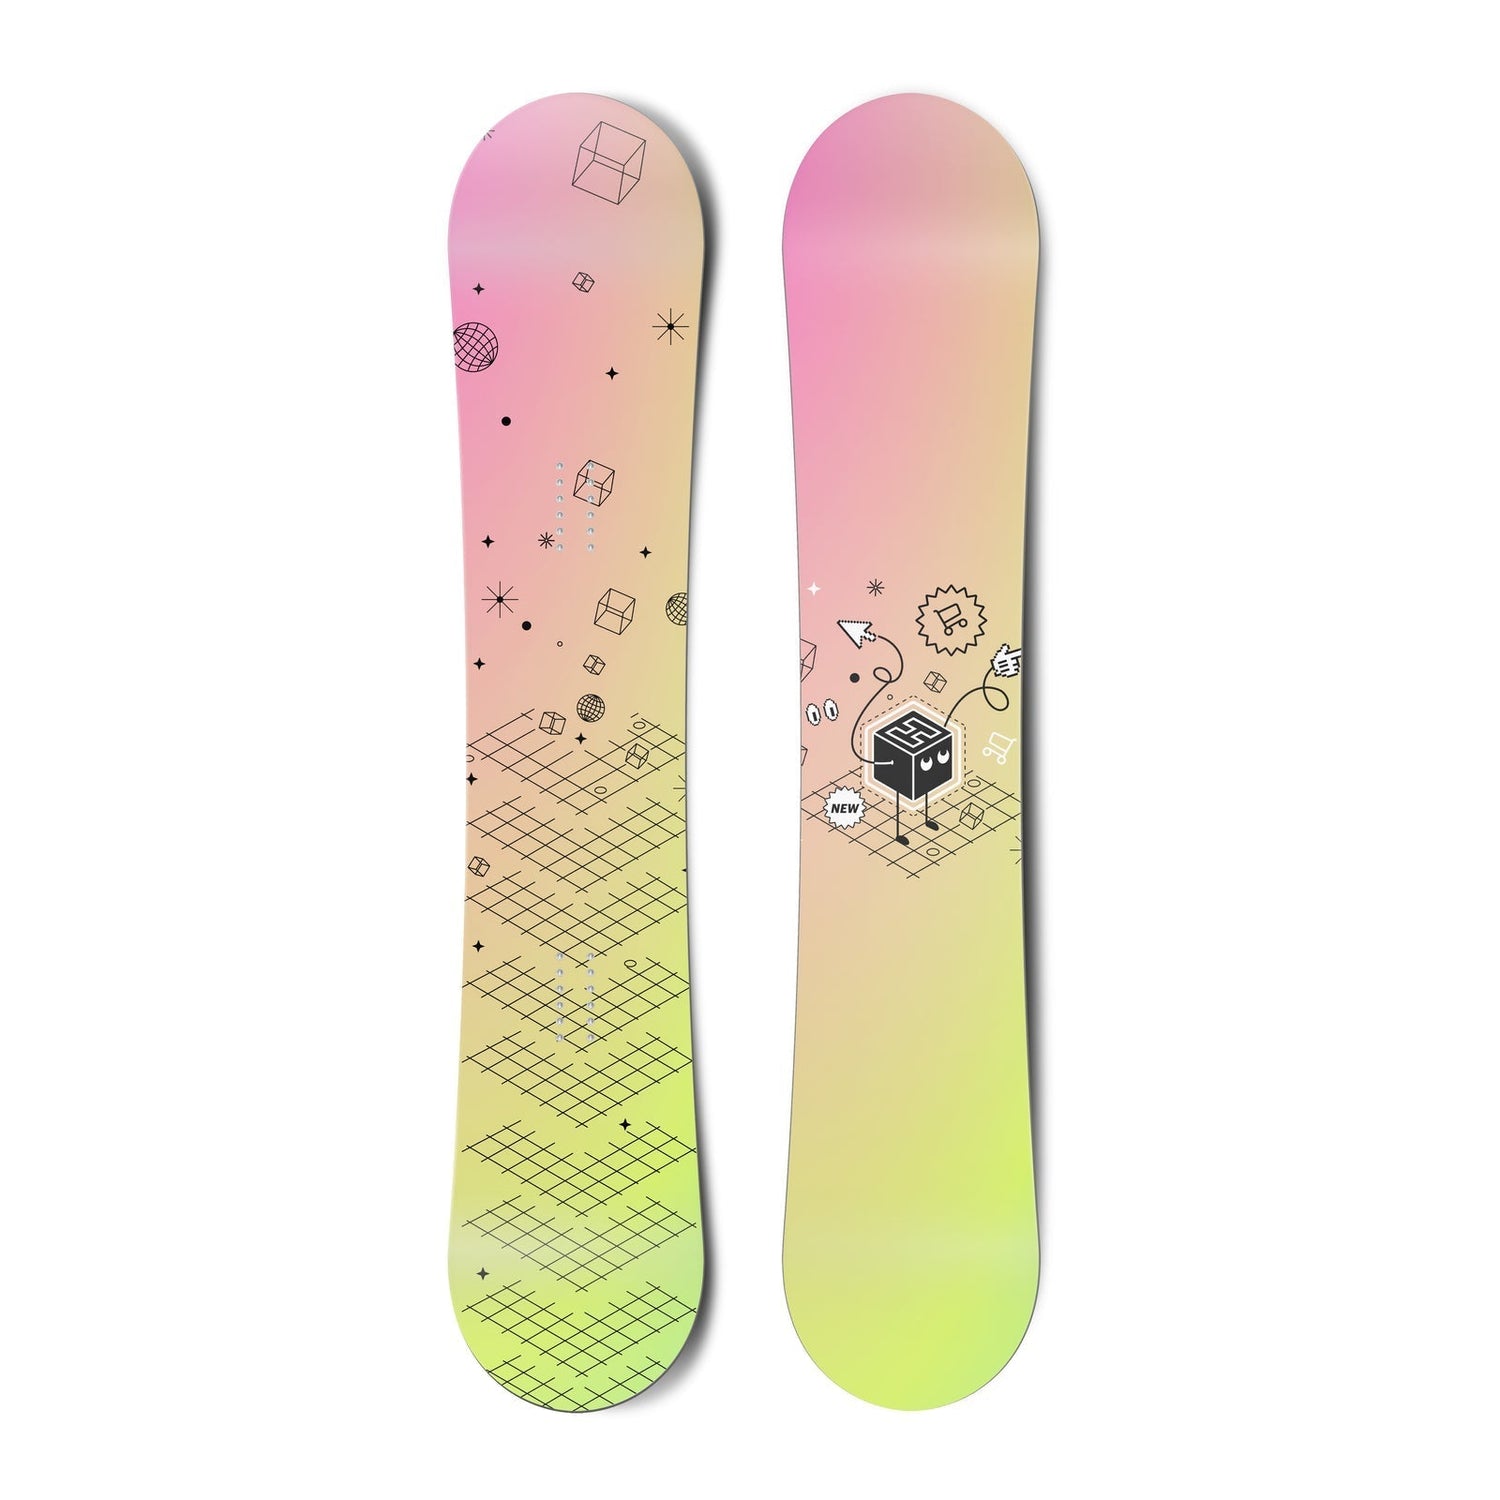 The Multi-managed Snowboard - Hyper